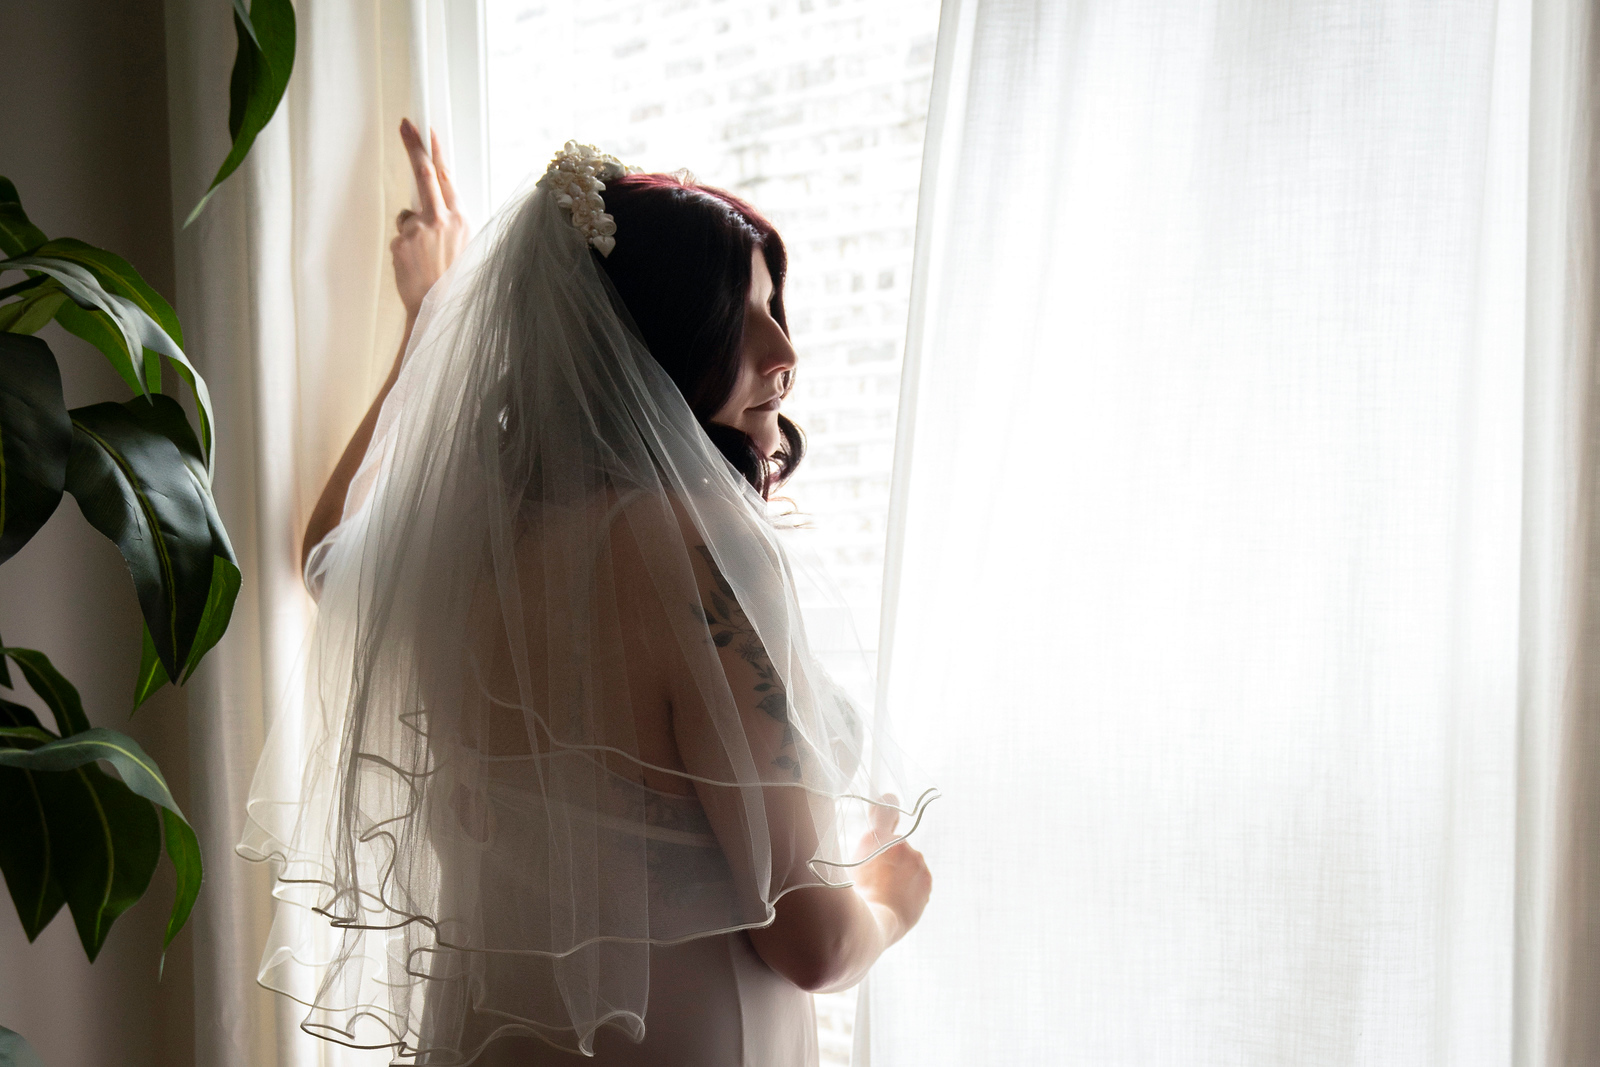 Photograph of a woman standing next to a window with a long veil and lingerie.e